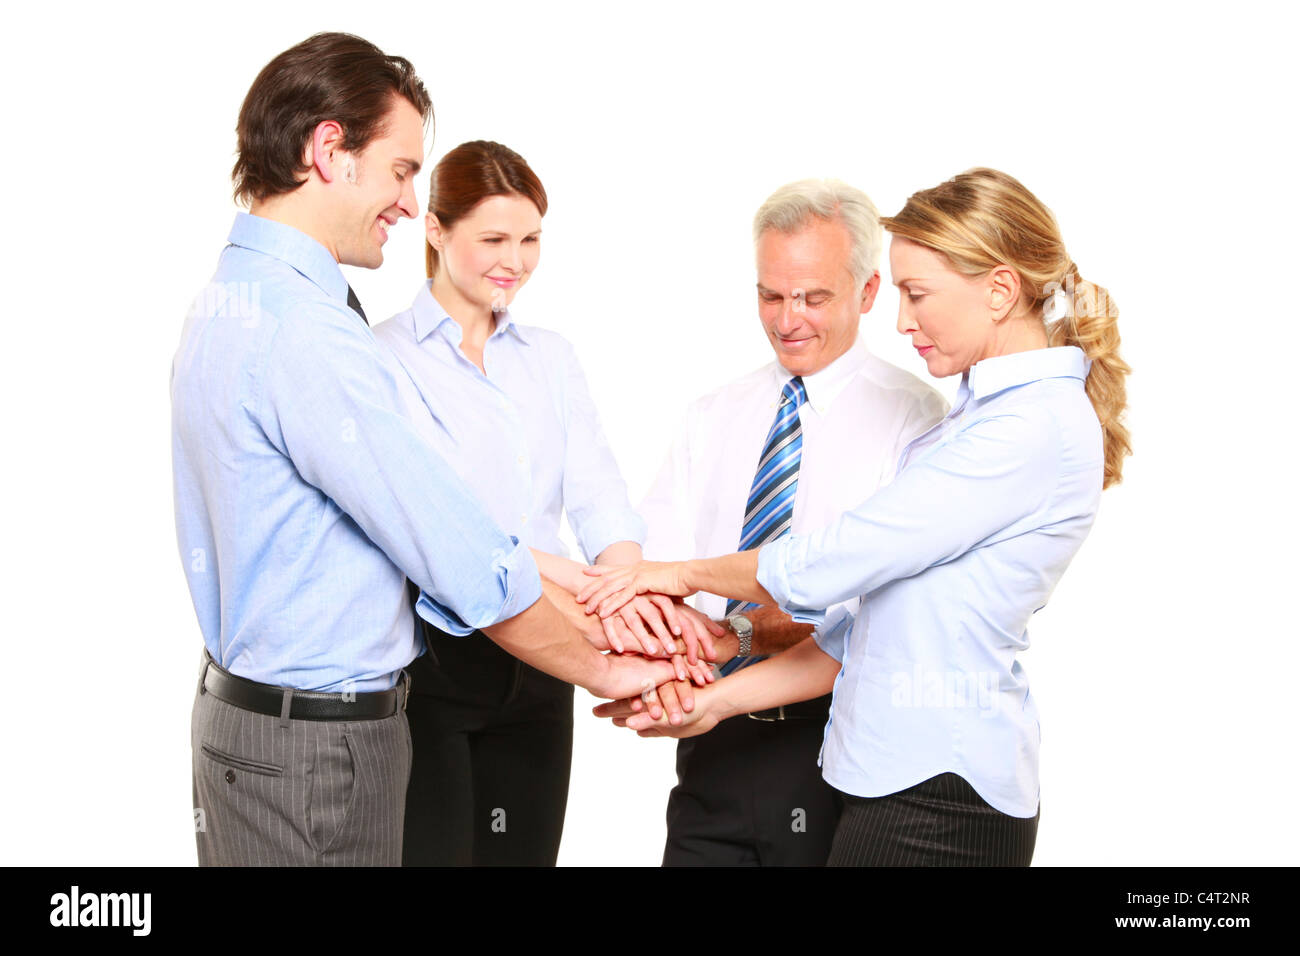 businessmen and businesswomen with hands joined Stock Photo